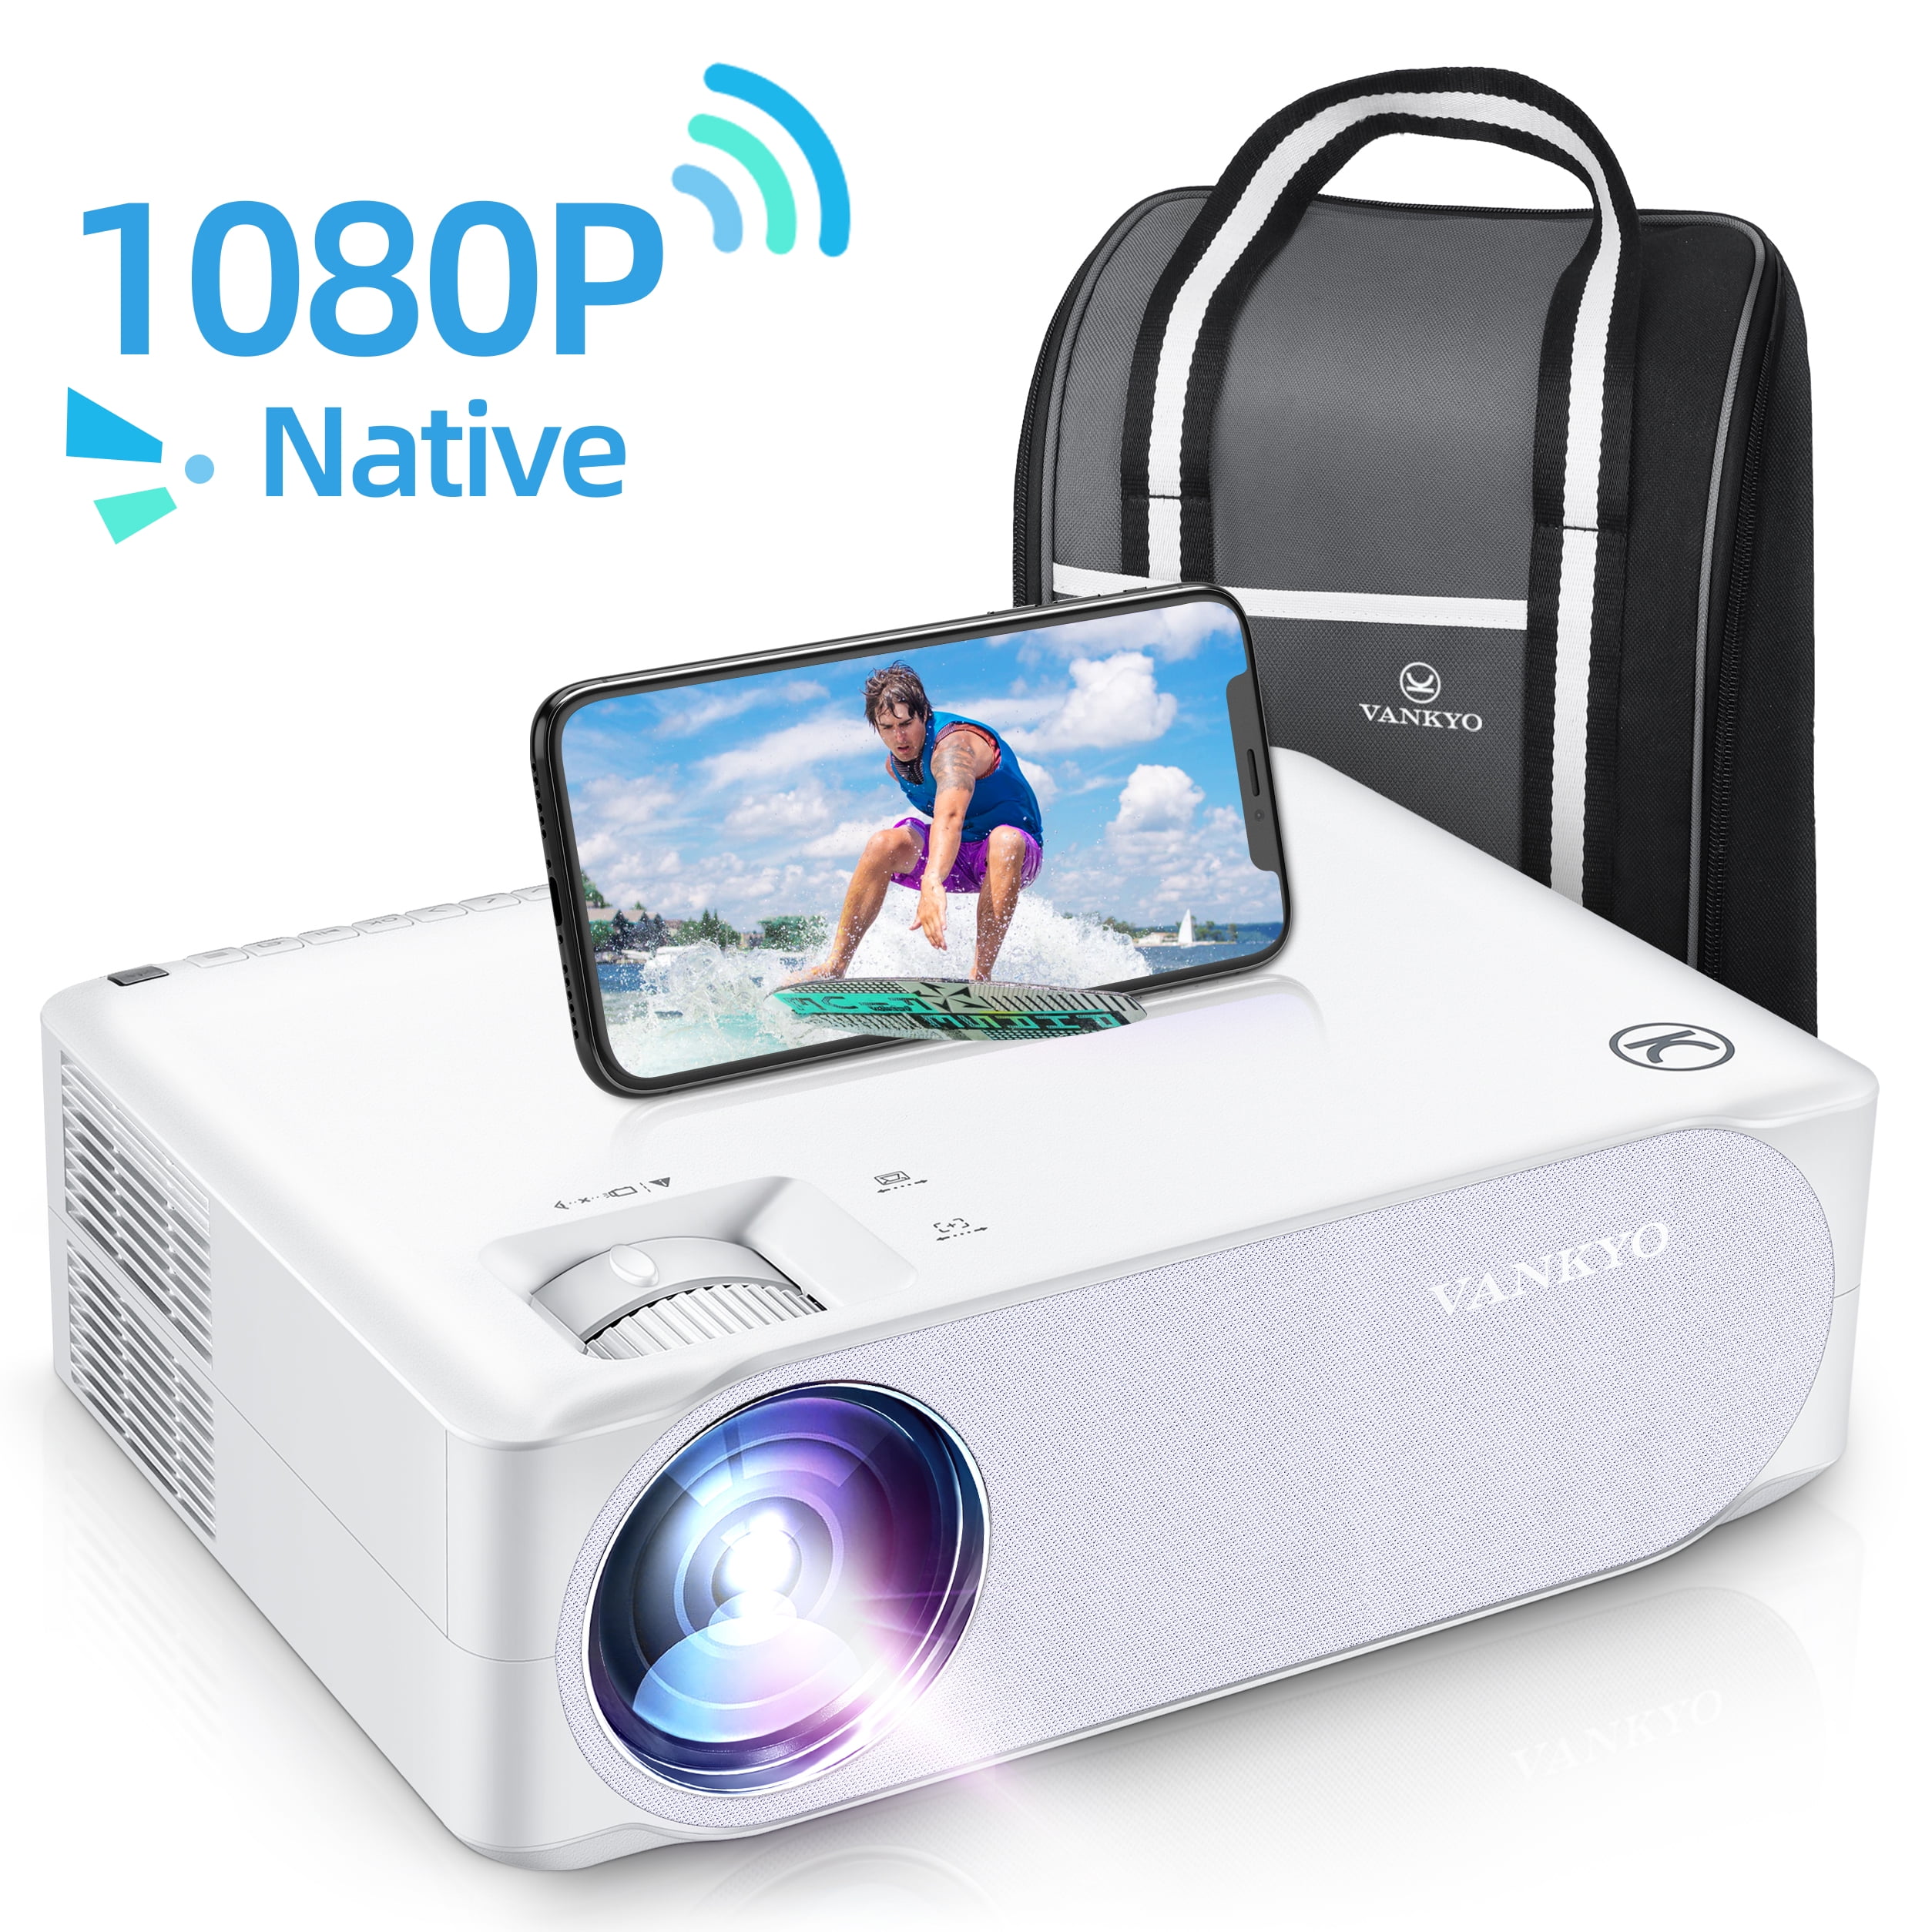 tsunamien Fedt Bliv ved VANKYO Performance V630W Native 1080P Projector, Full HD 5G Wifi Projector  with LCD Display - Walmart.com